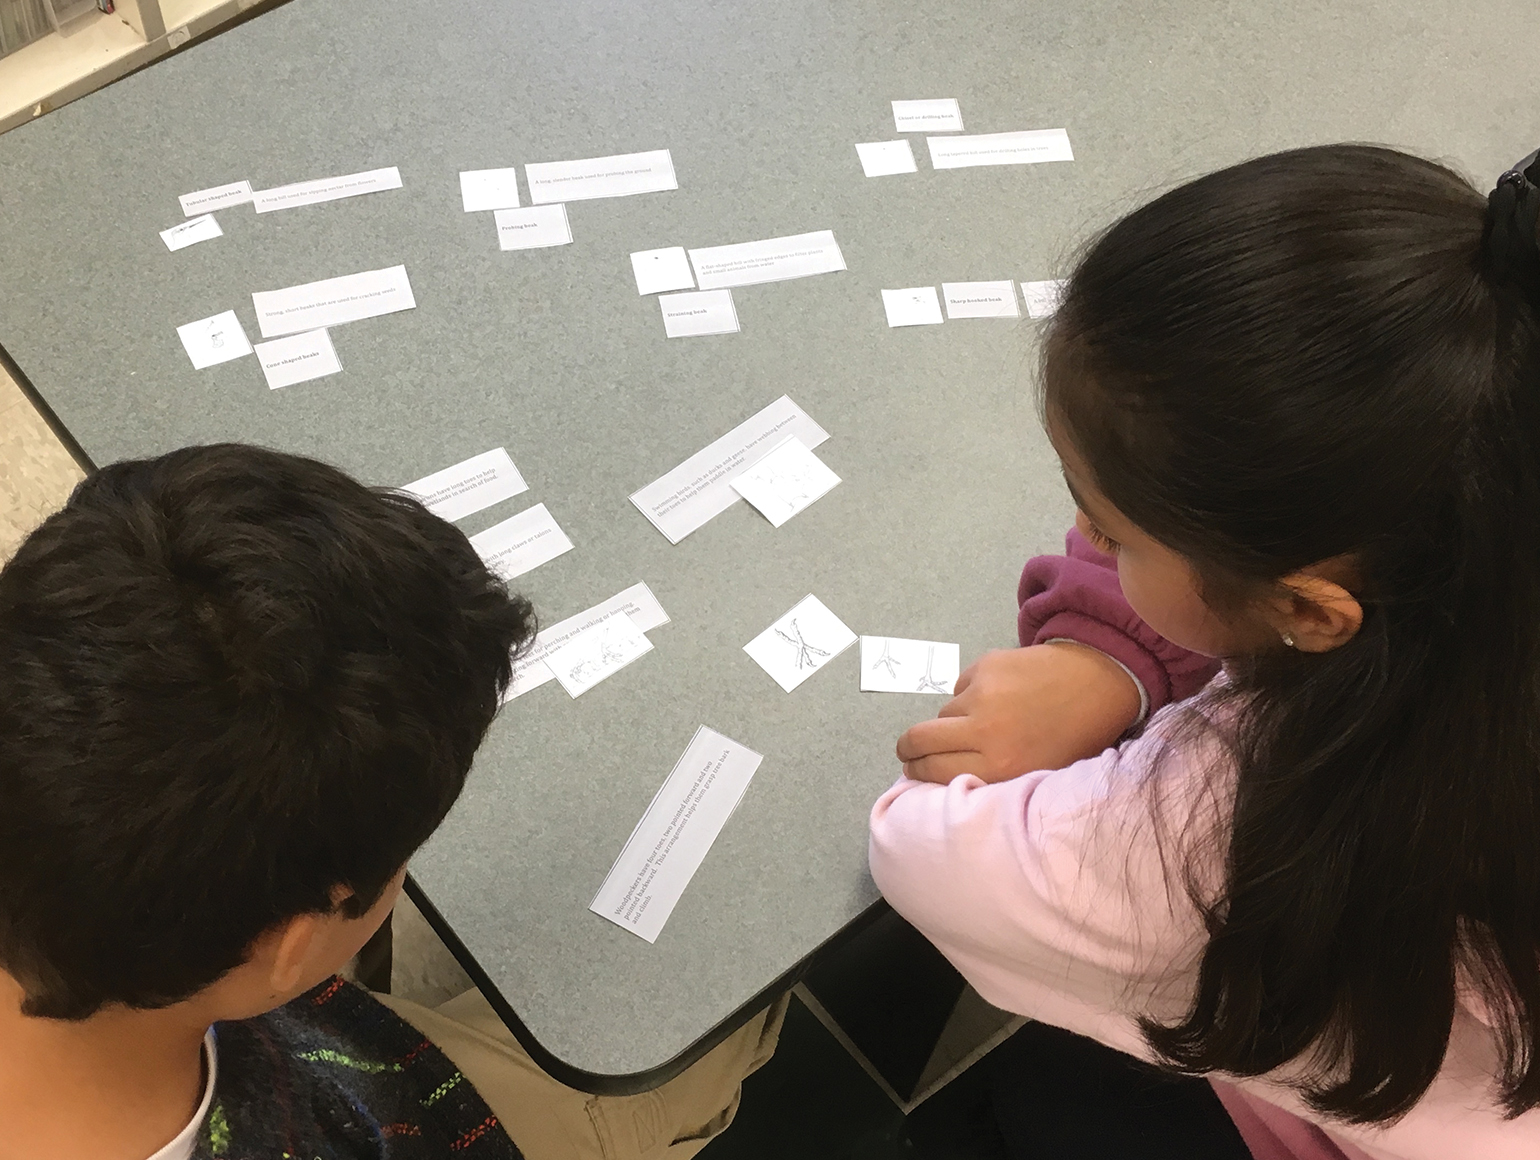 Students participate in a matching game.